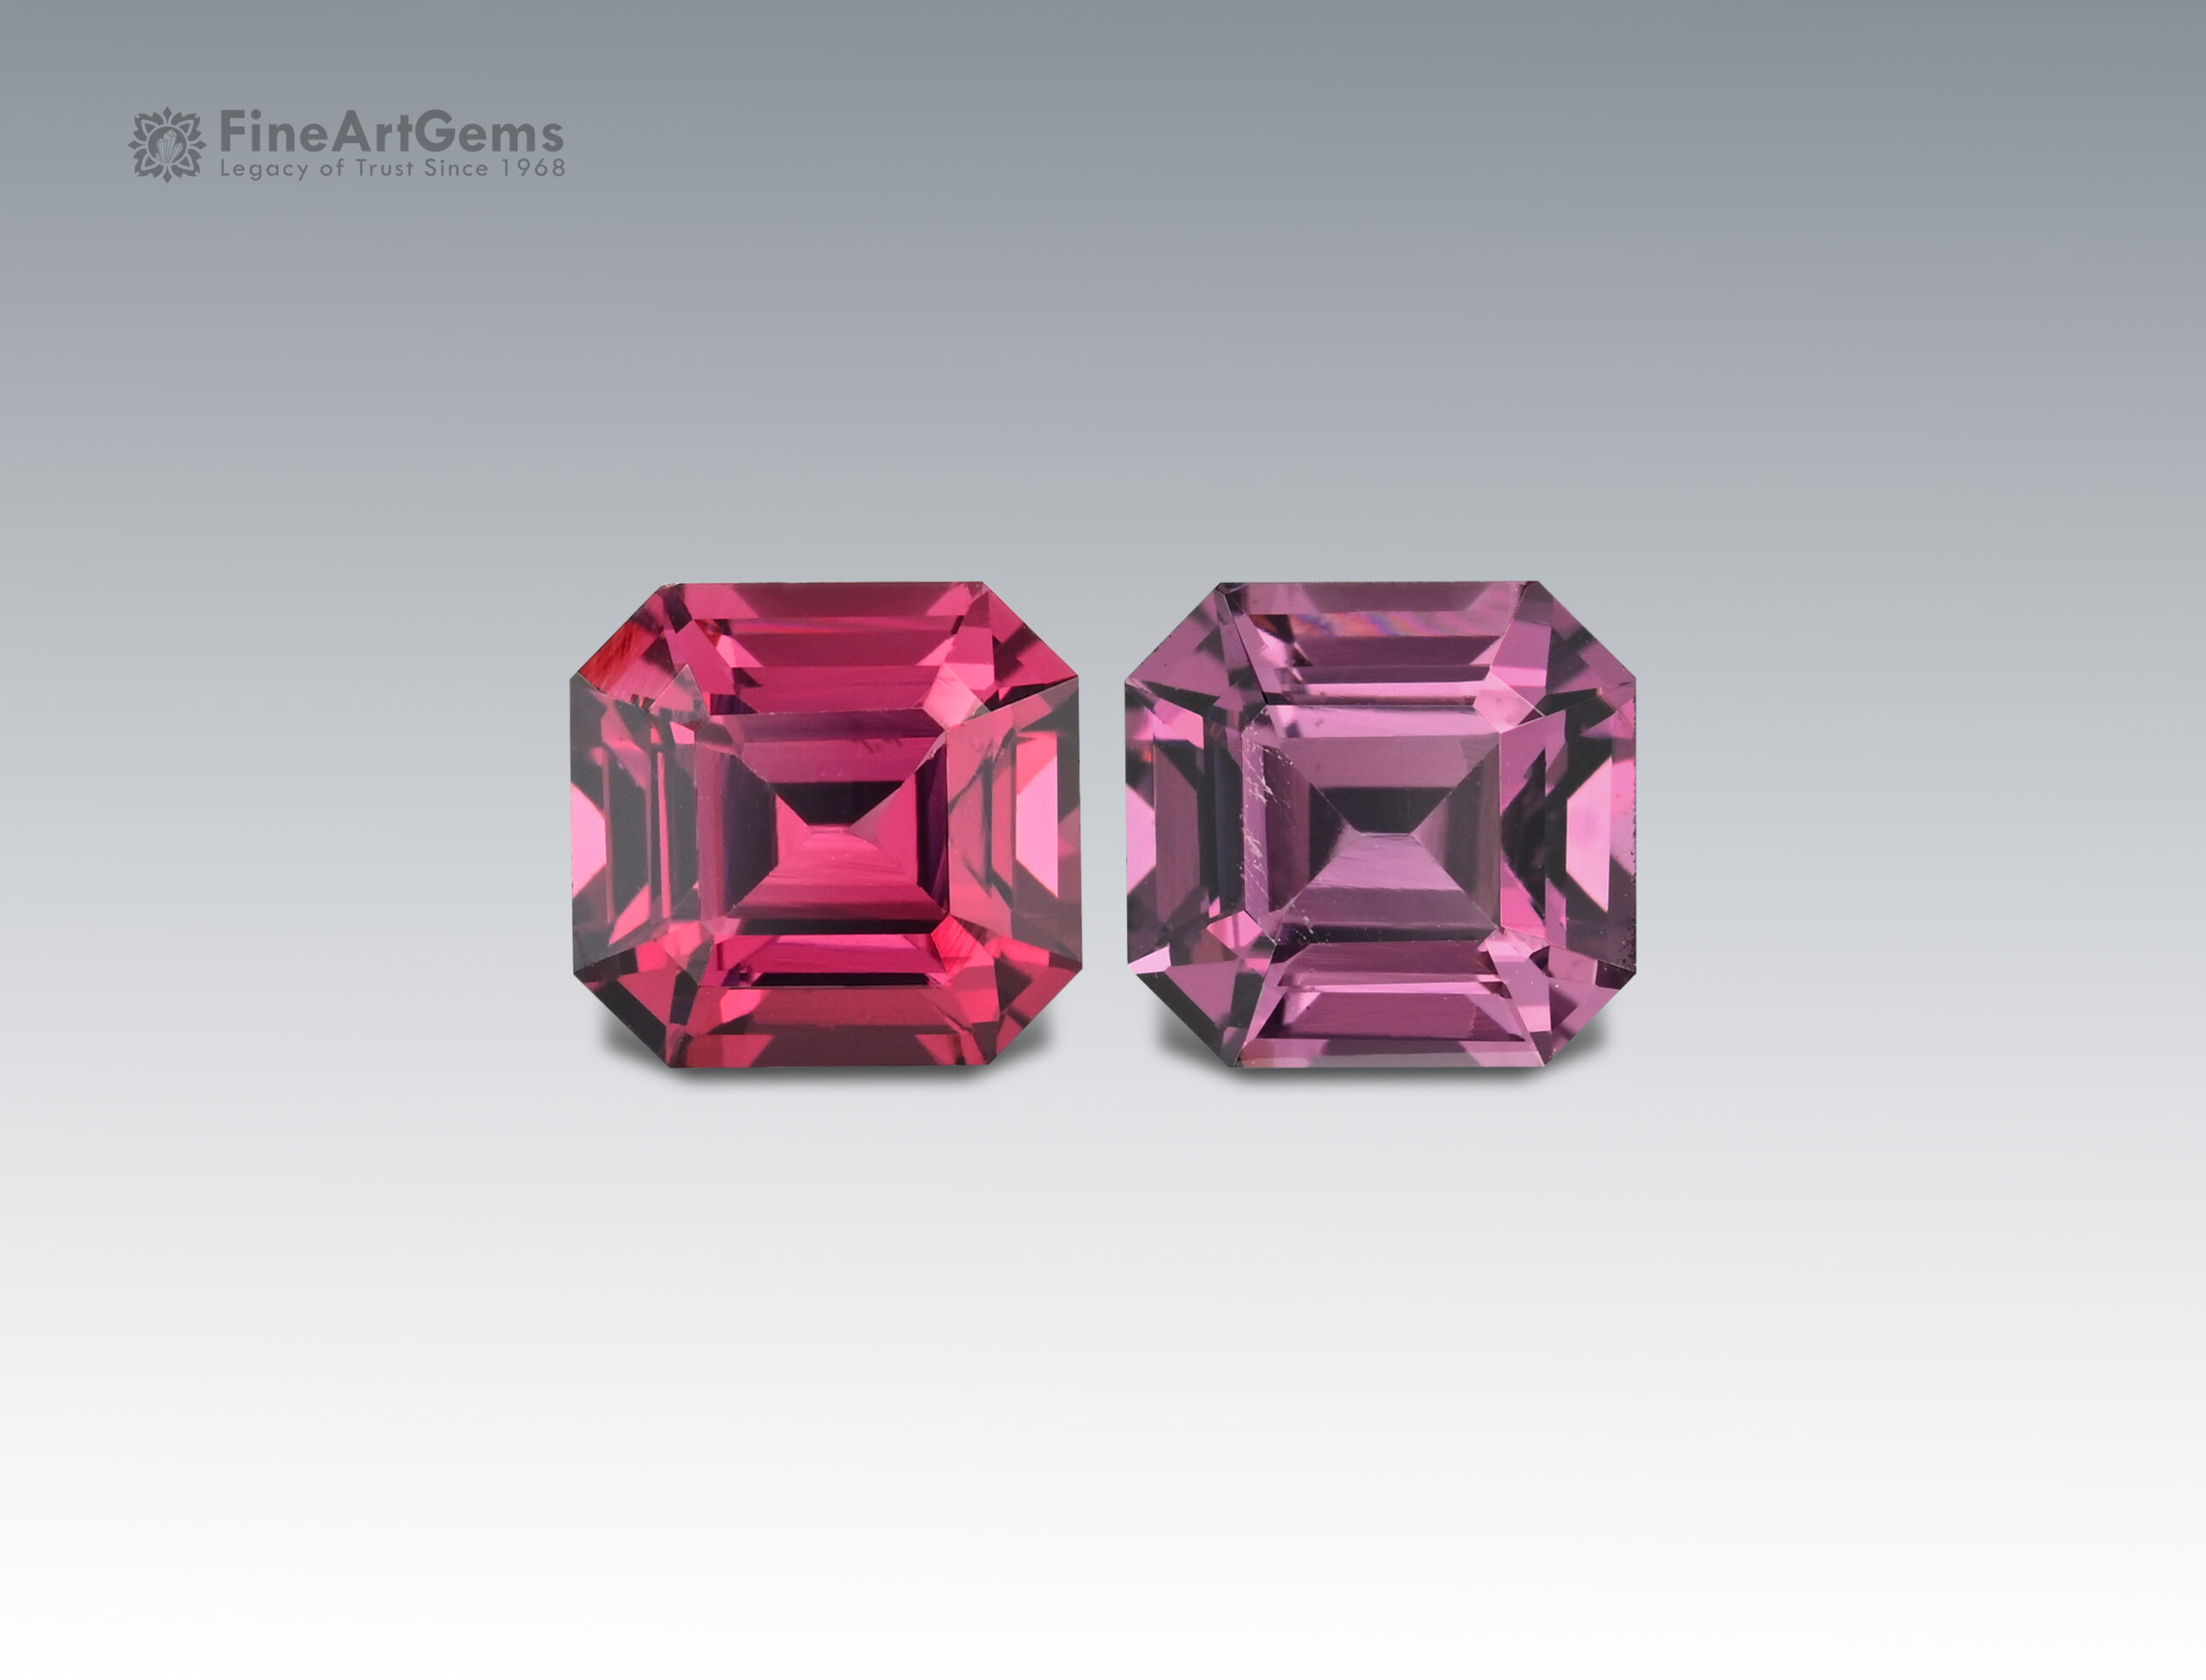 3.5 Carats Spinel Gemstone Lovely Reverse Pair from Tajikistan